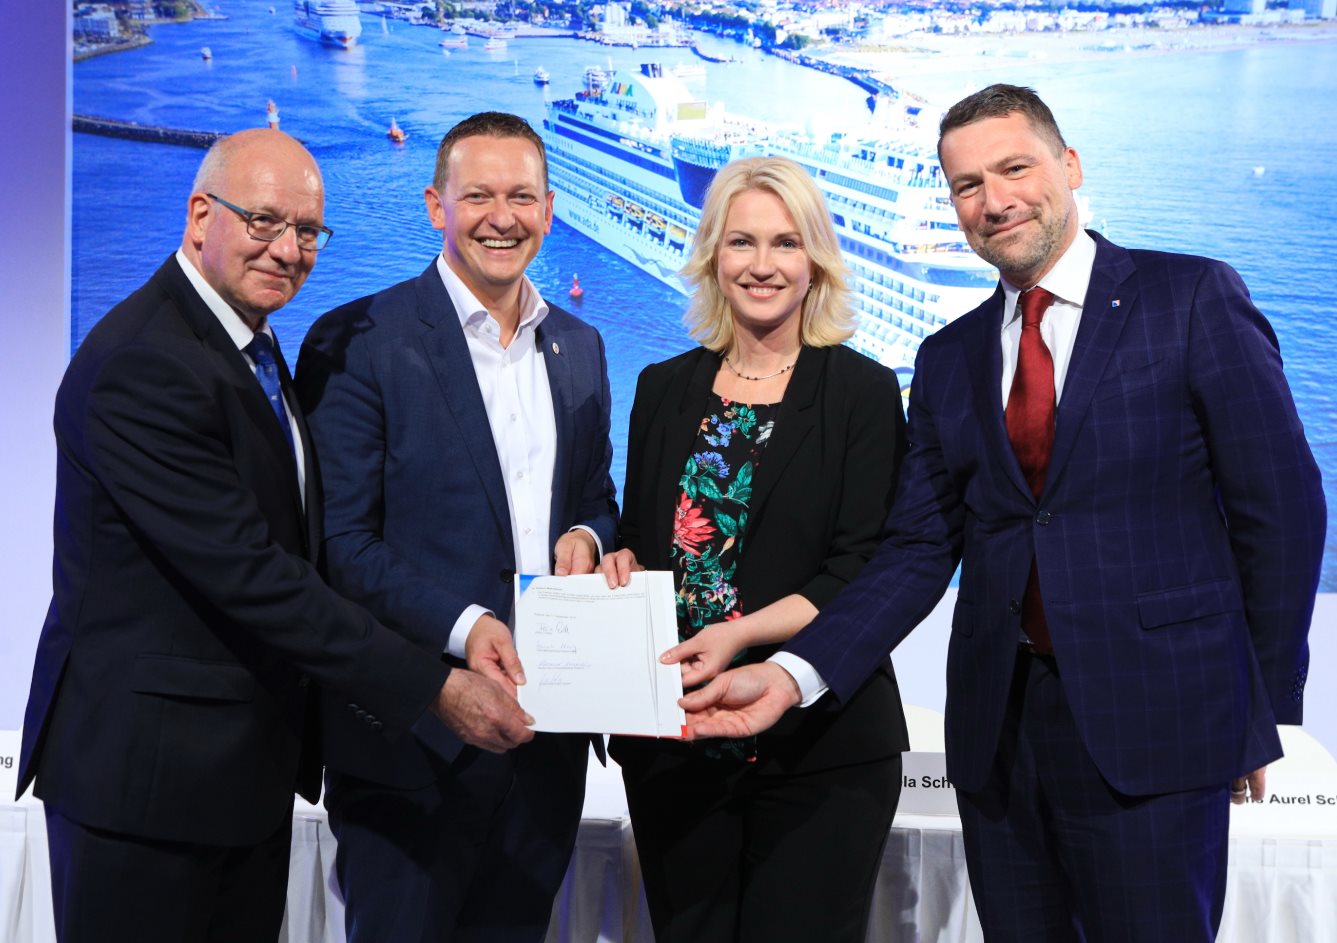 (from left) Rostock's Lord Mayor Roland Methling, AIDA President Felix Eichhorn, Prime Minister Manuela Schwesig and Rostock's port chief Jens Aurel Scharner signed an agreement to promote environmentally friendly cruise tourism in Rostock.